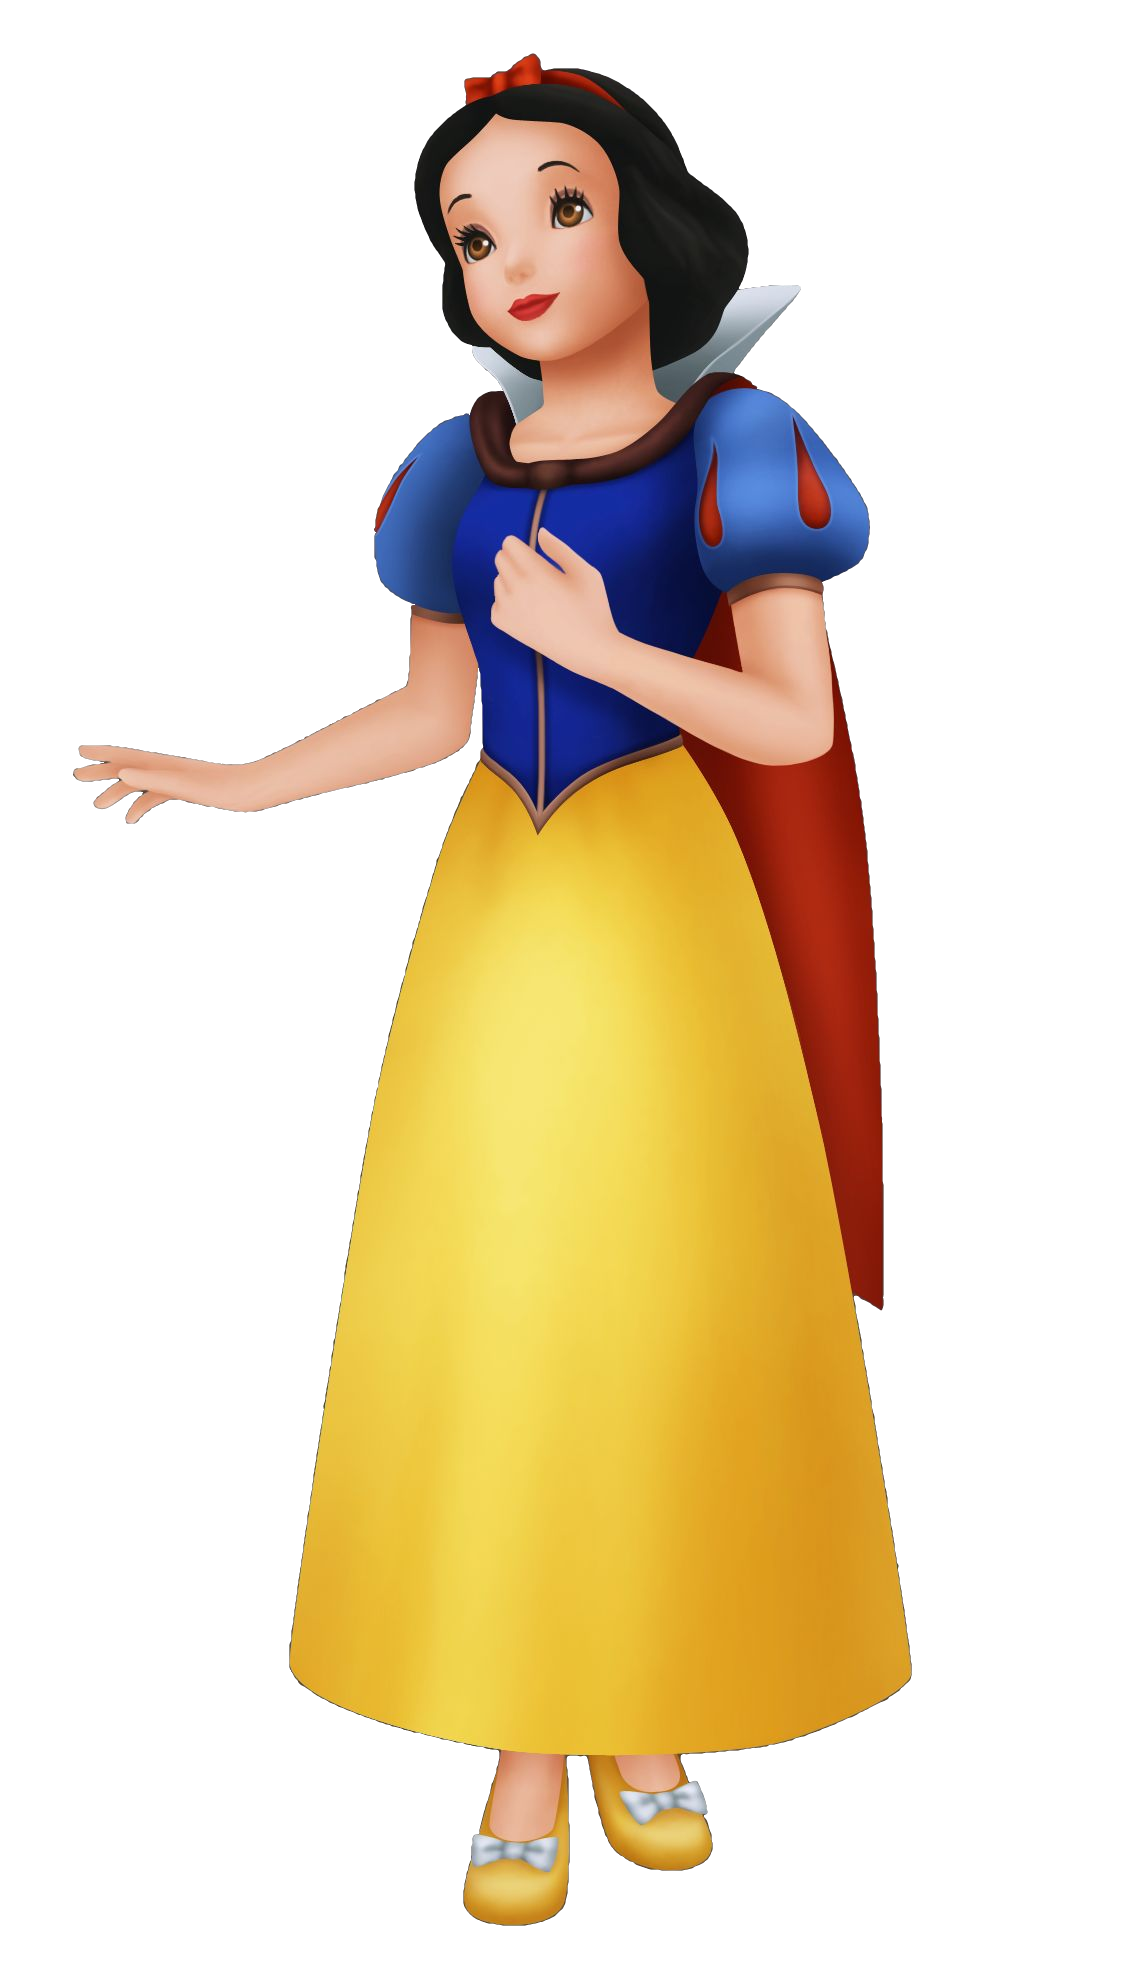 Snow White PNG Free Download SVG Clip arts